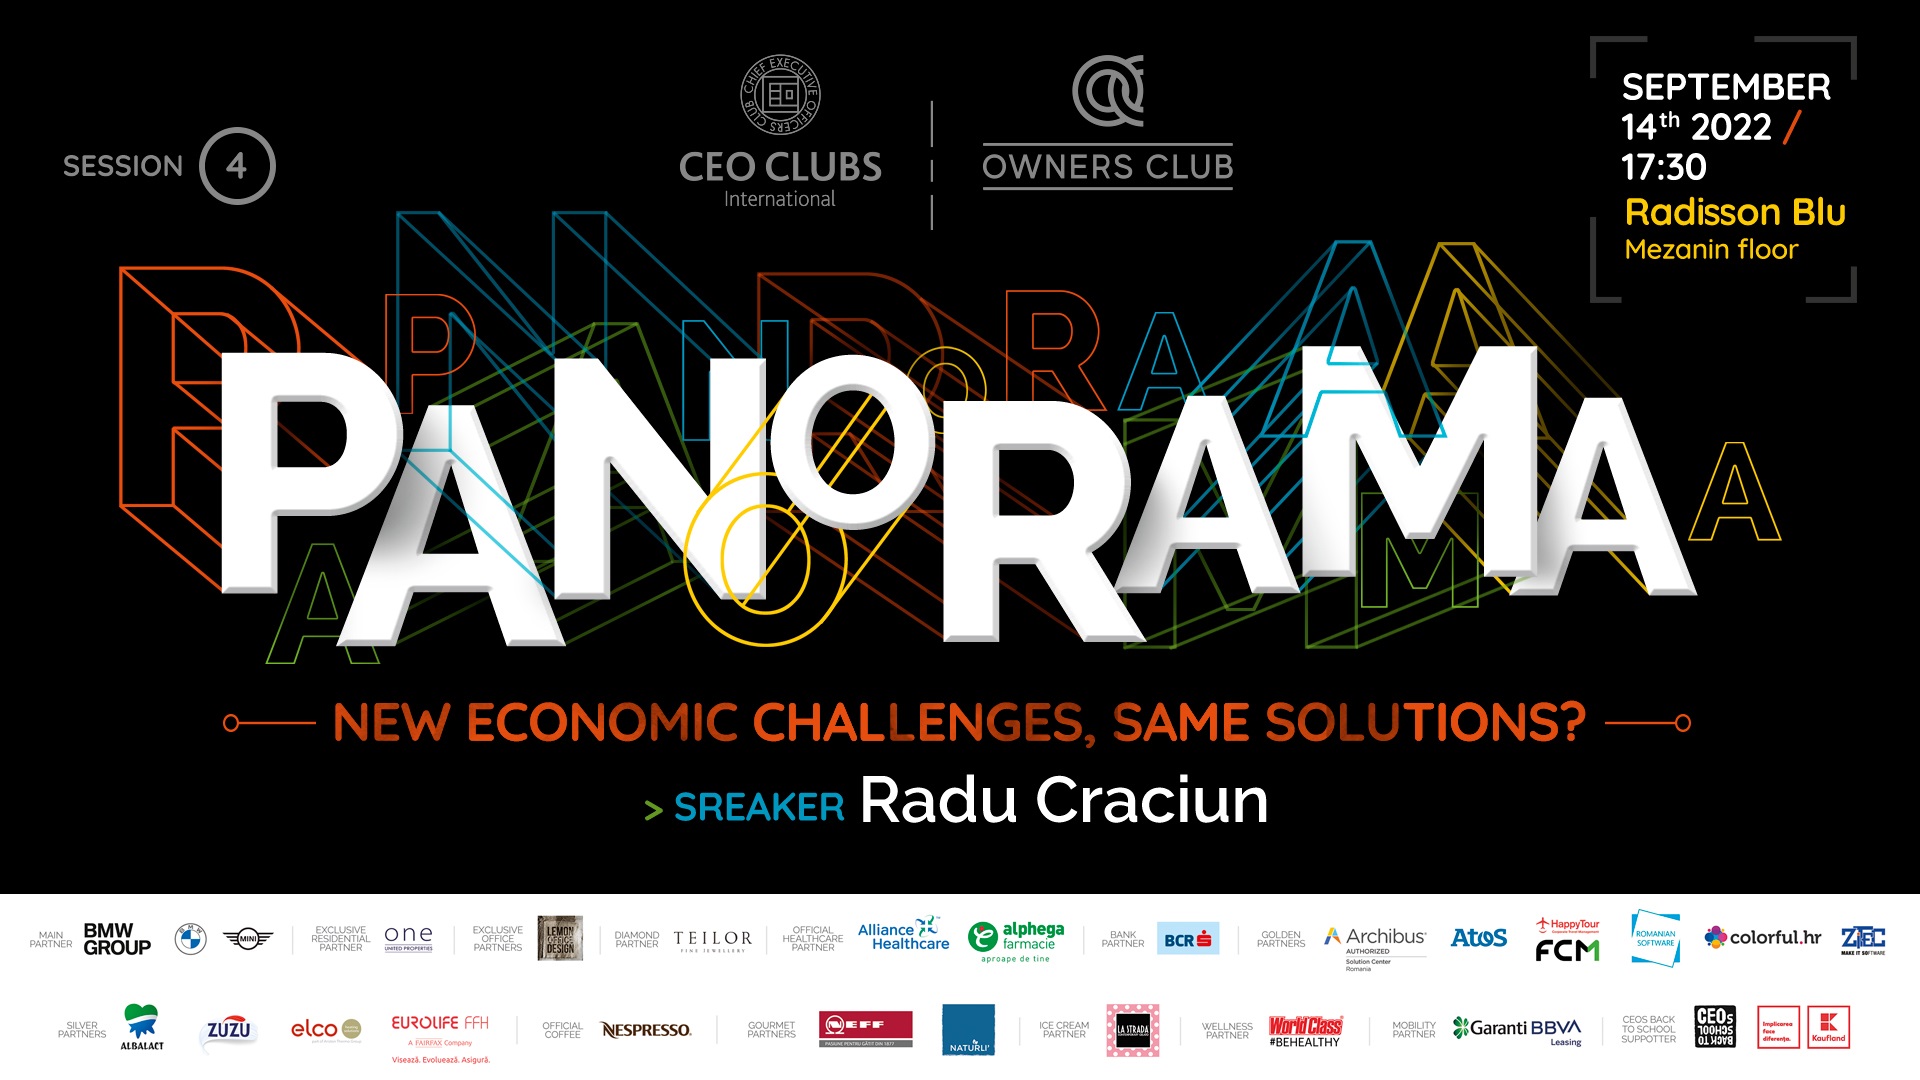 CEO Clubs & Owners Club Panorama: New economic challenges, same solutions?